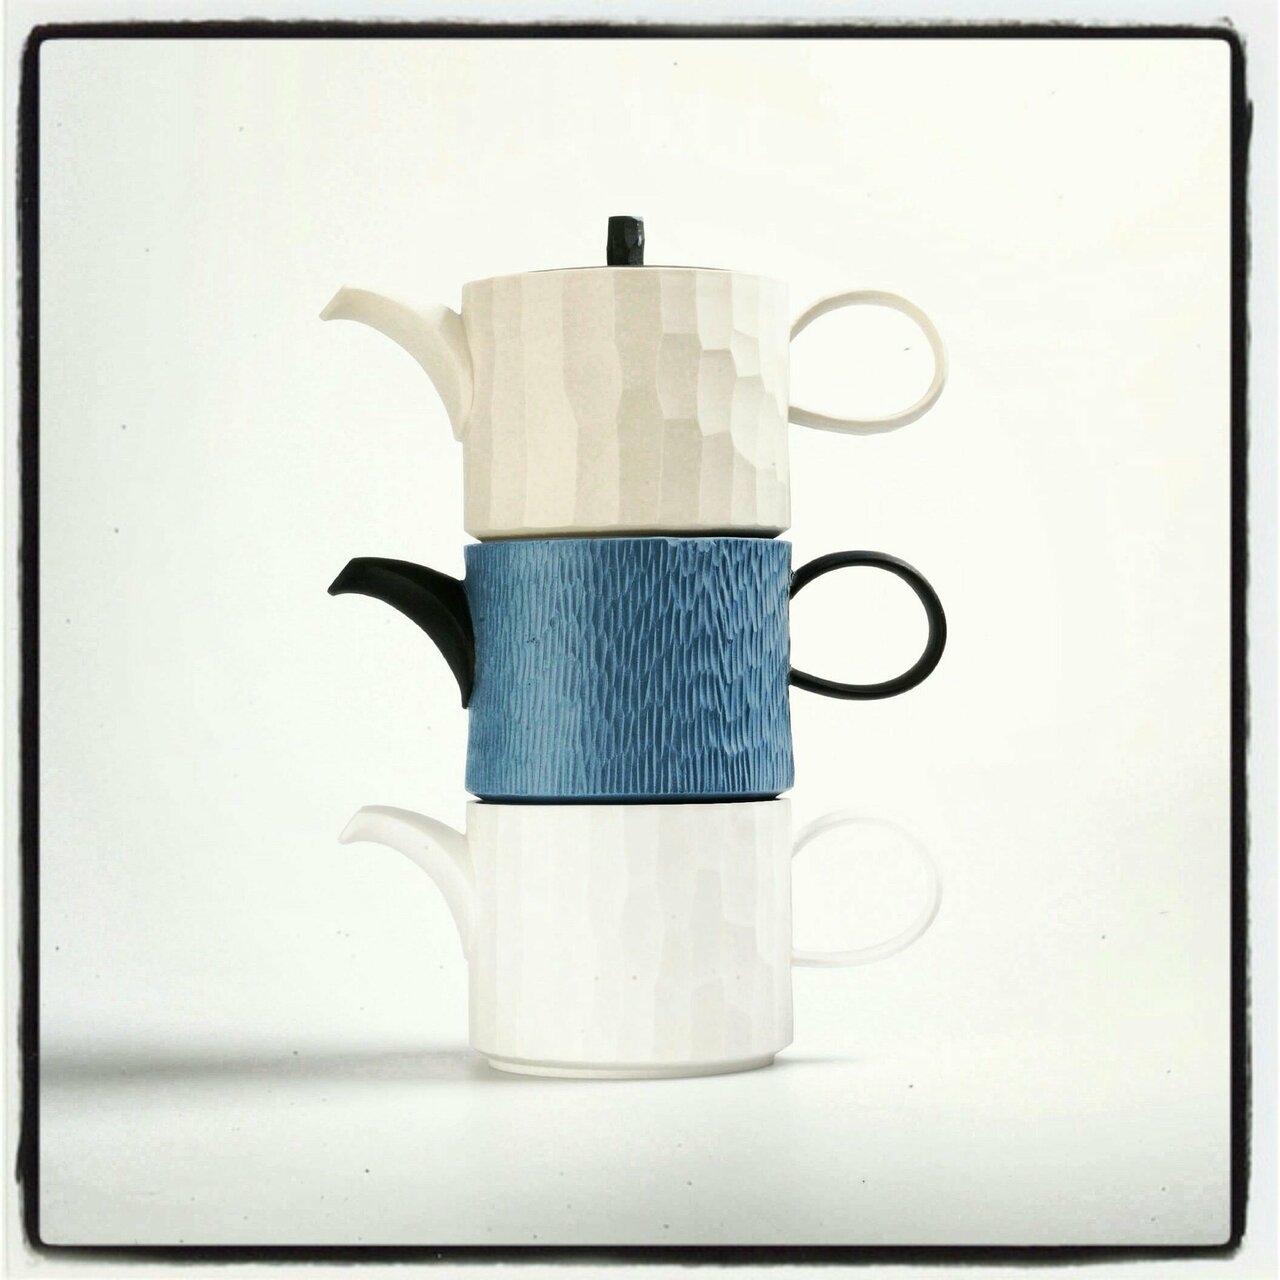 Ceramic hand thrown & carved tea pots by Hyu Jin Jo. Buy at MADE FRESH Exhibition http://www.madenorthgallery.co.uk/portfolio/made-fresh/ #ceramics http://t.co/hcgFGdMdmd